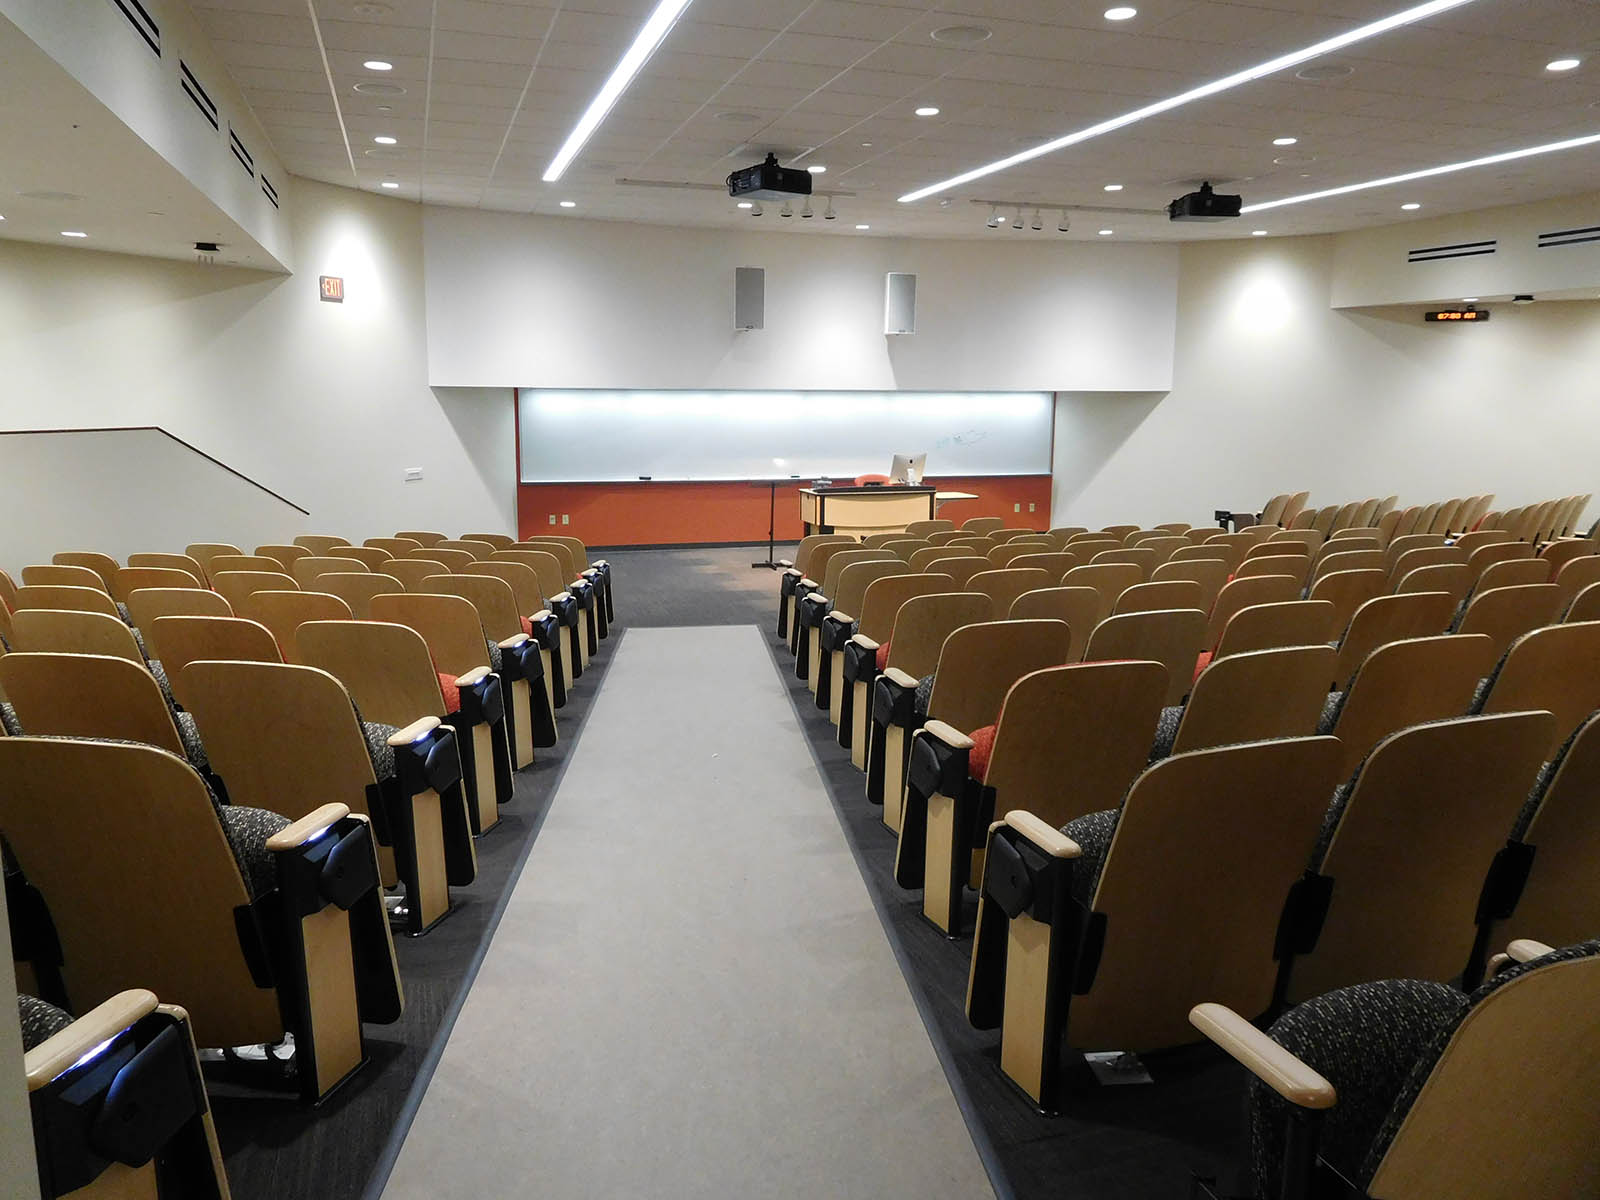 A lecture room at UW Oshkosh with recessed ceiling lights, projectors and audio system